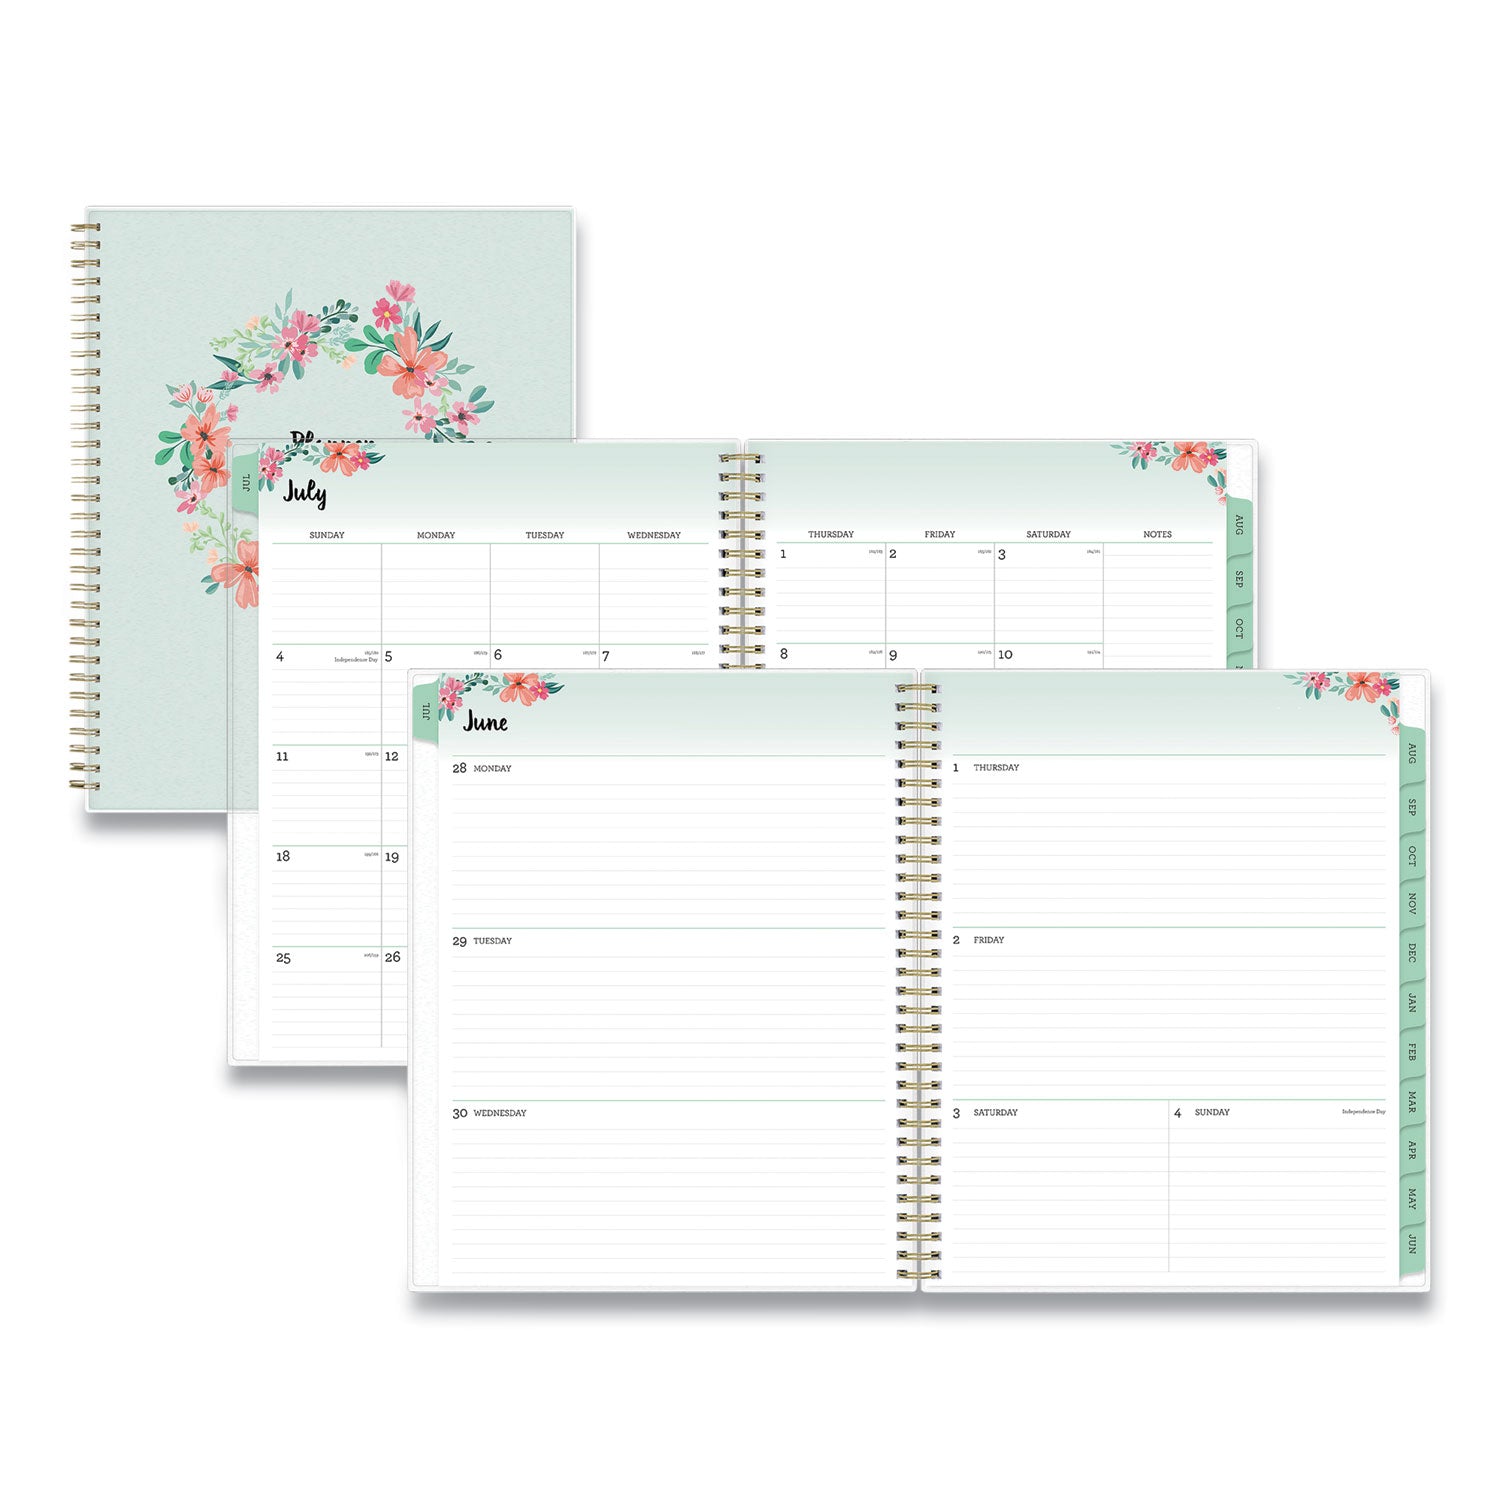 laurel-academic-year-weekly-monthly-planner-floral-artwork-11-x-85-green-pink-cover-12-month-july-june-2021-2022_bls131947 - 1